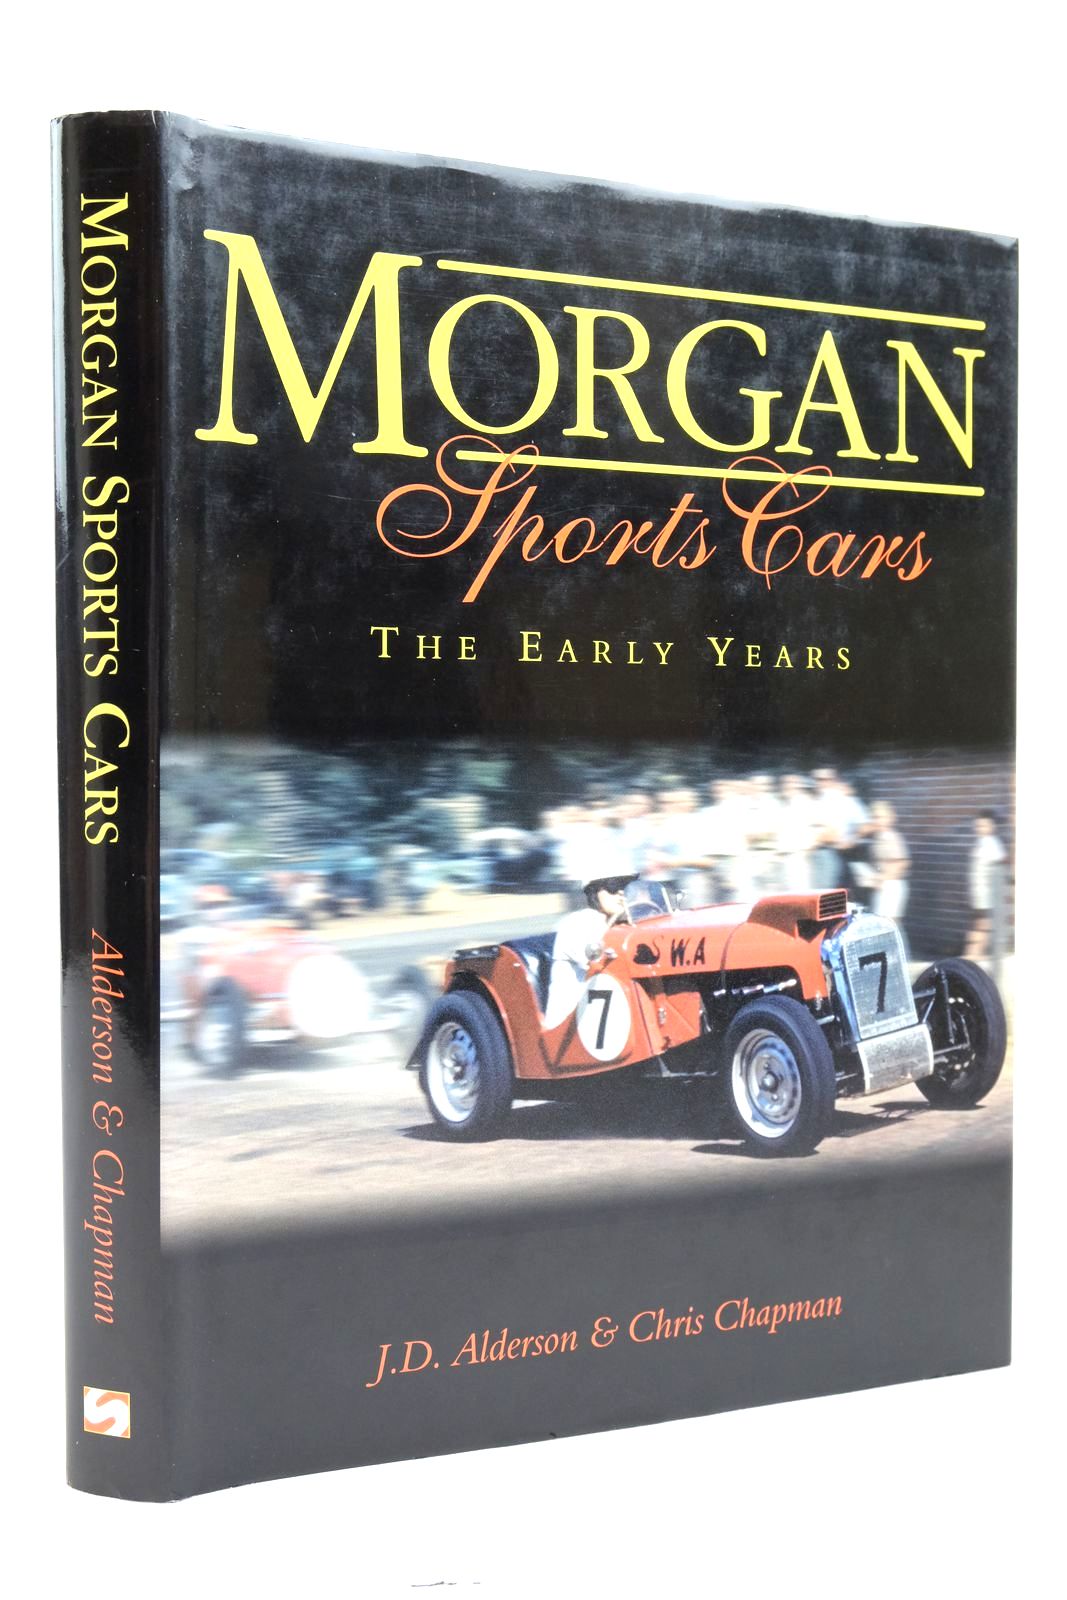 Photo of MORGAN SPORTS CARS: THE EARLY YEARS written by Alderson, J.D. Chapman, Chris published by Sheffield Academic Press (STOCK CODE: 2139951)  for sale by Stella & Rose's Books